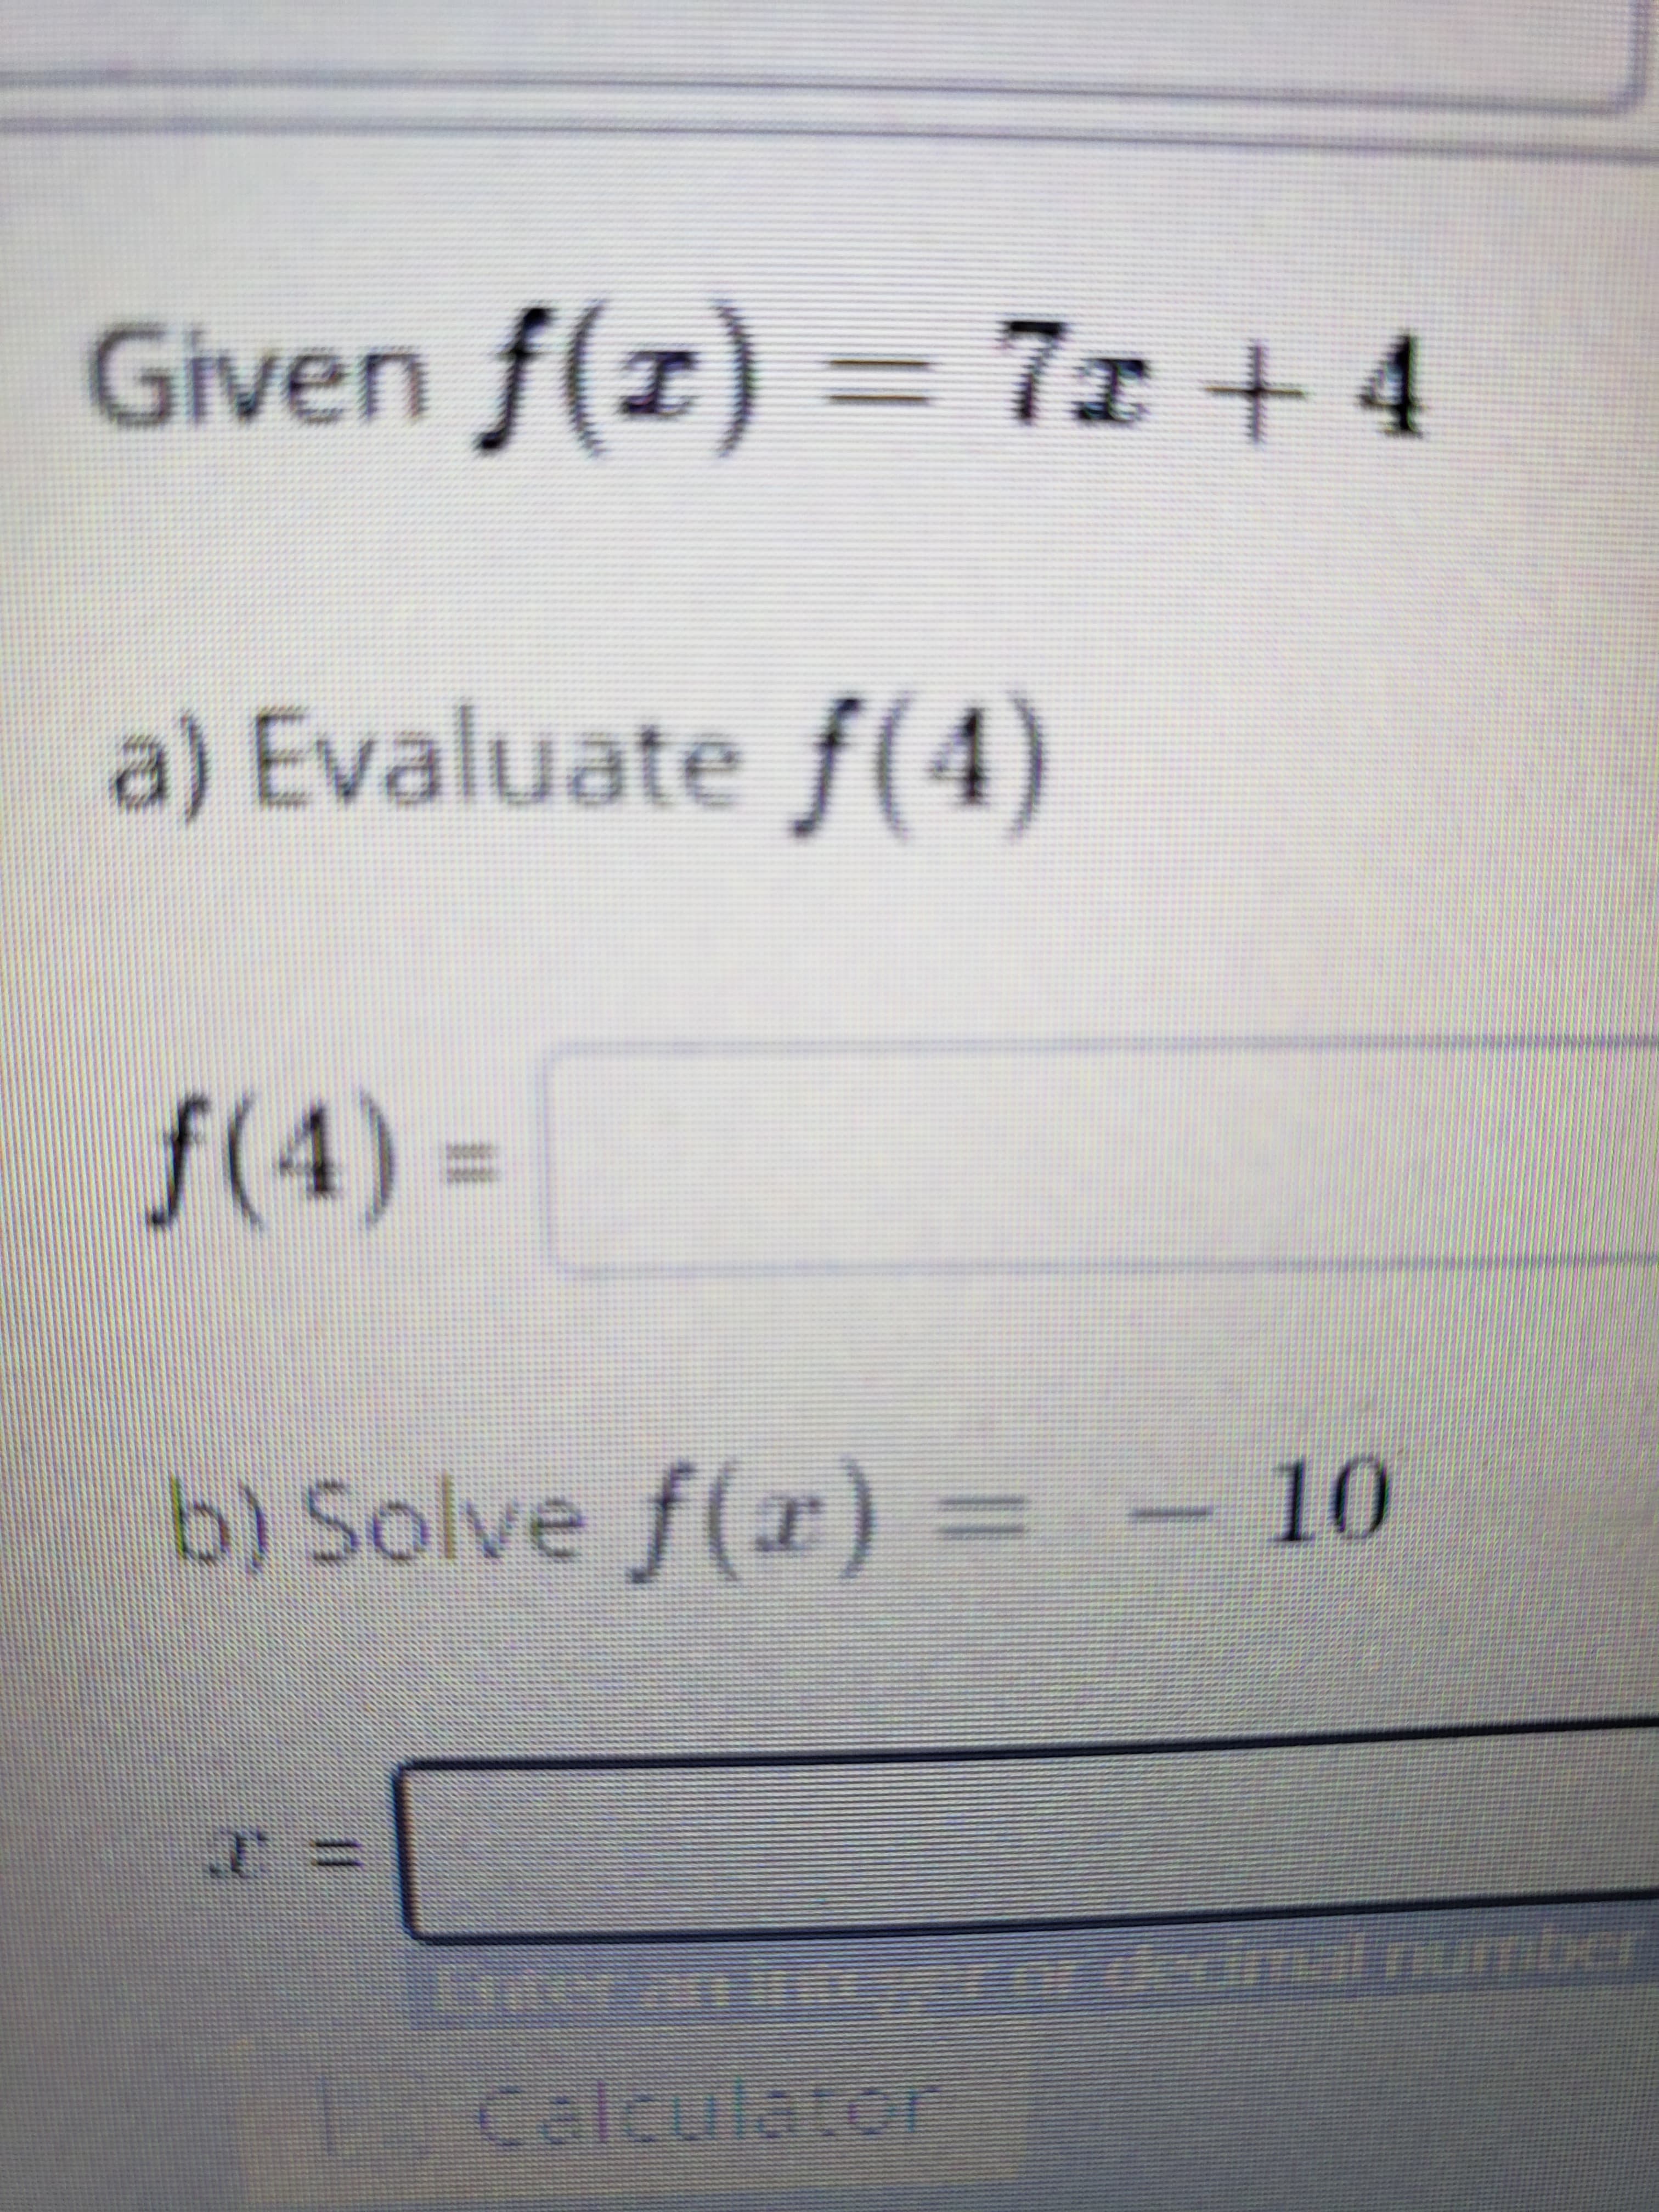 Given f(z) = 7x + 4
